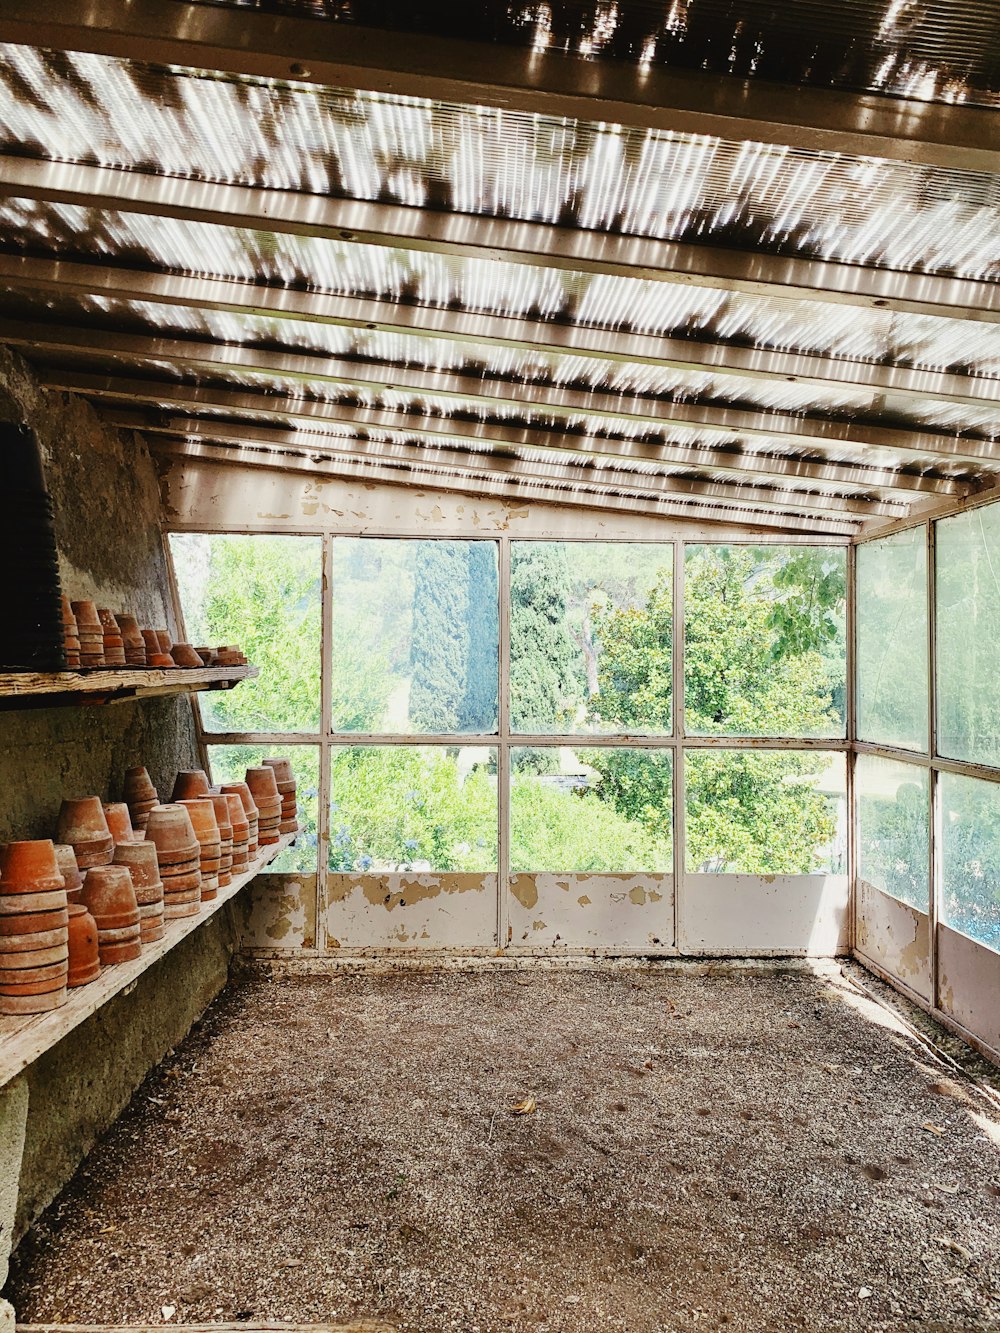 brown clay pots on window